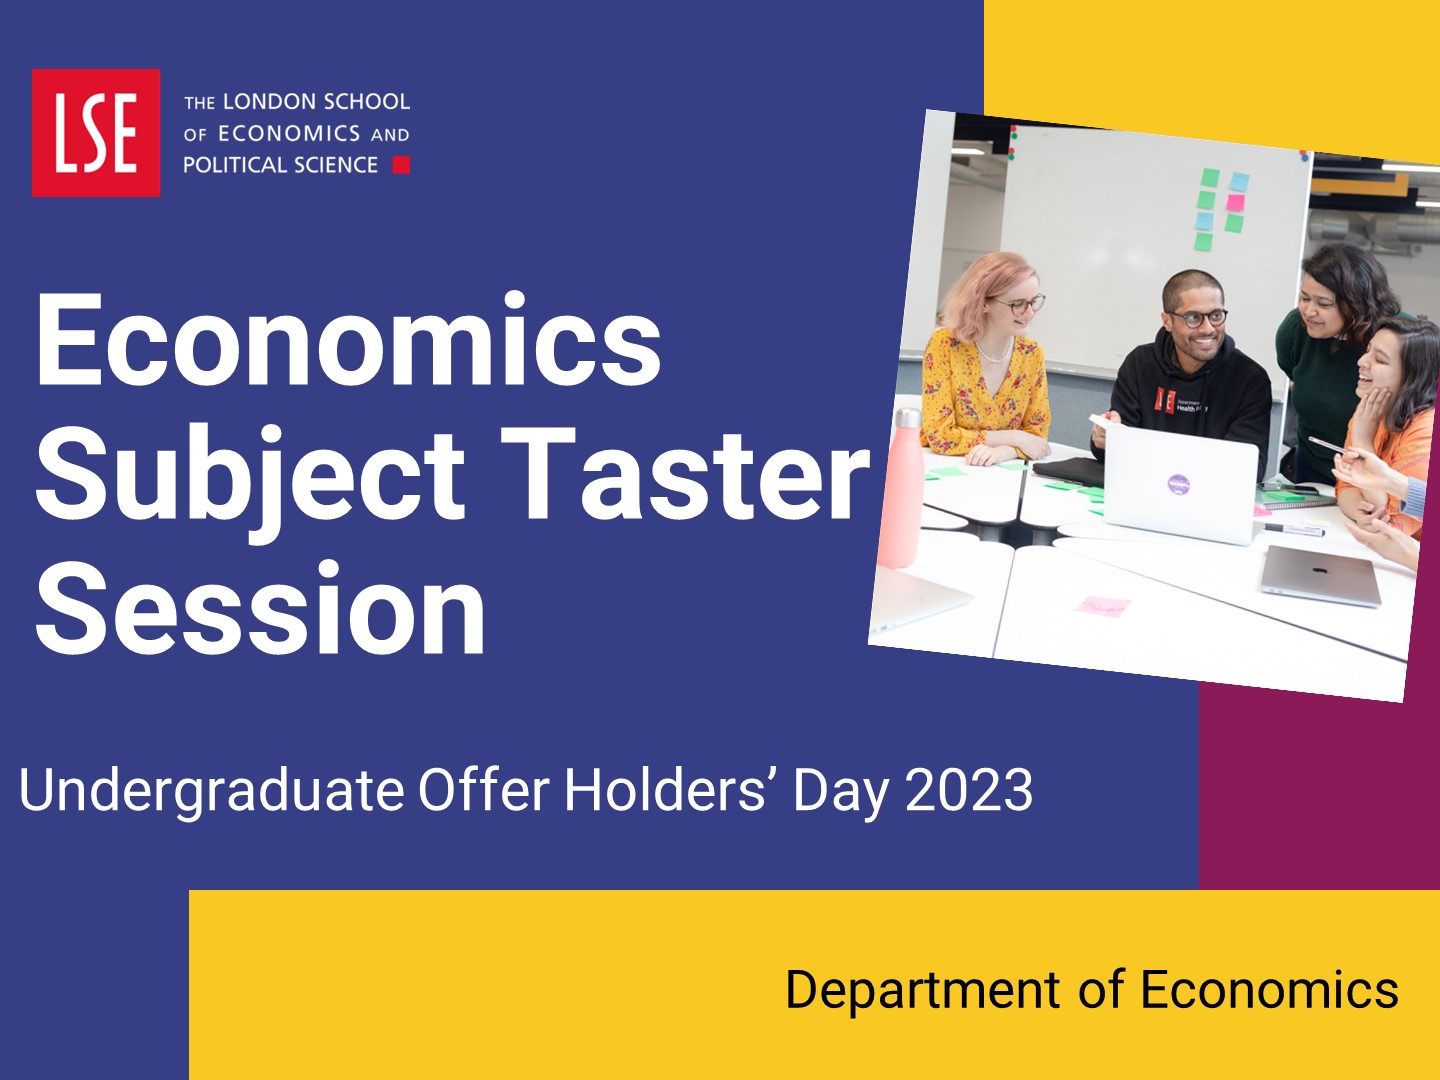 Watch the economics subject taster session